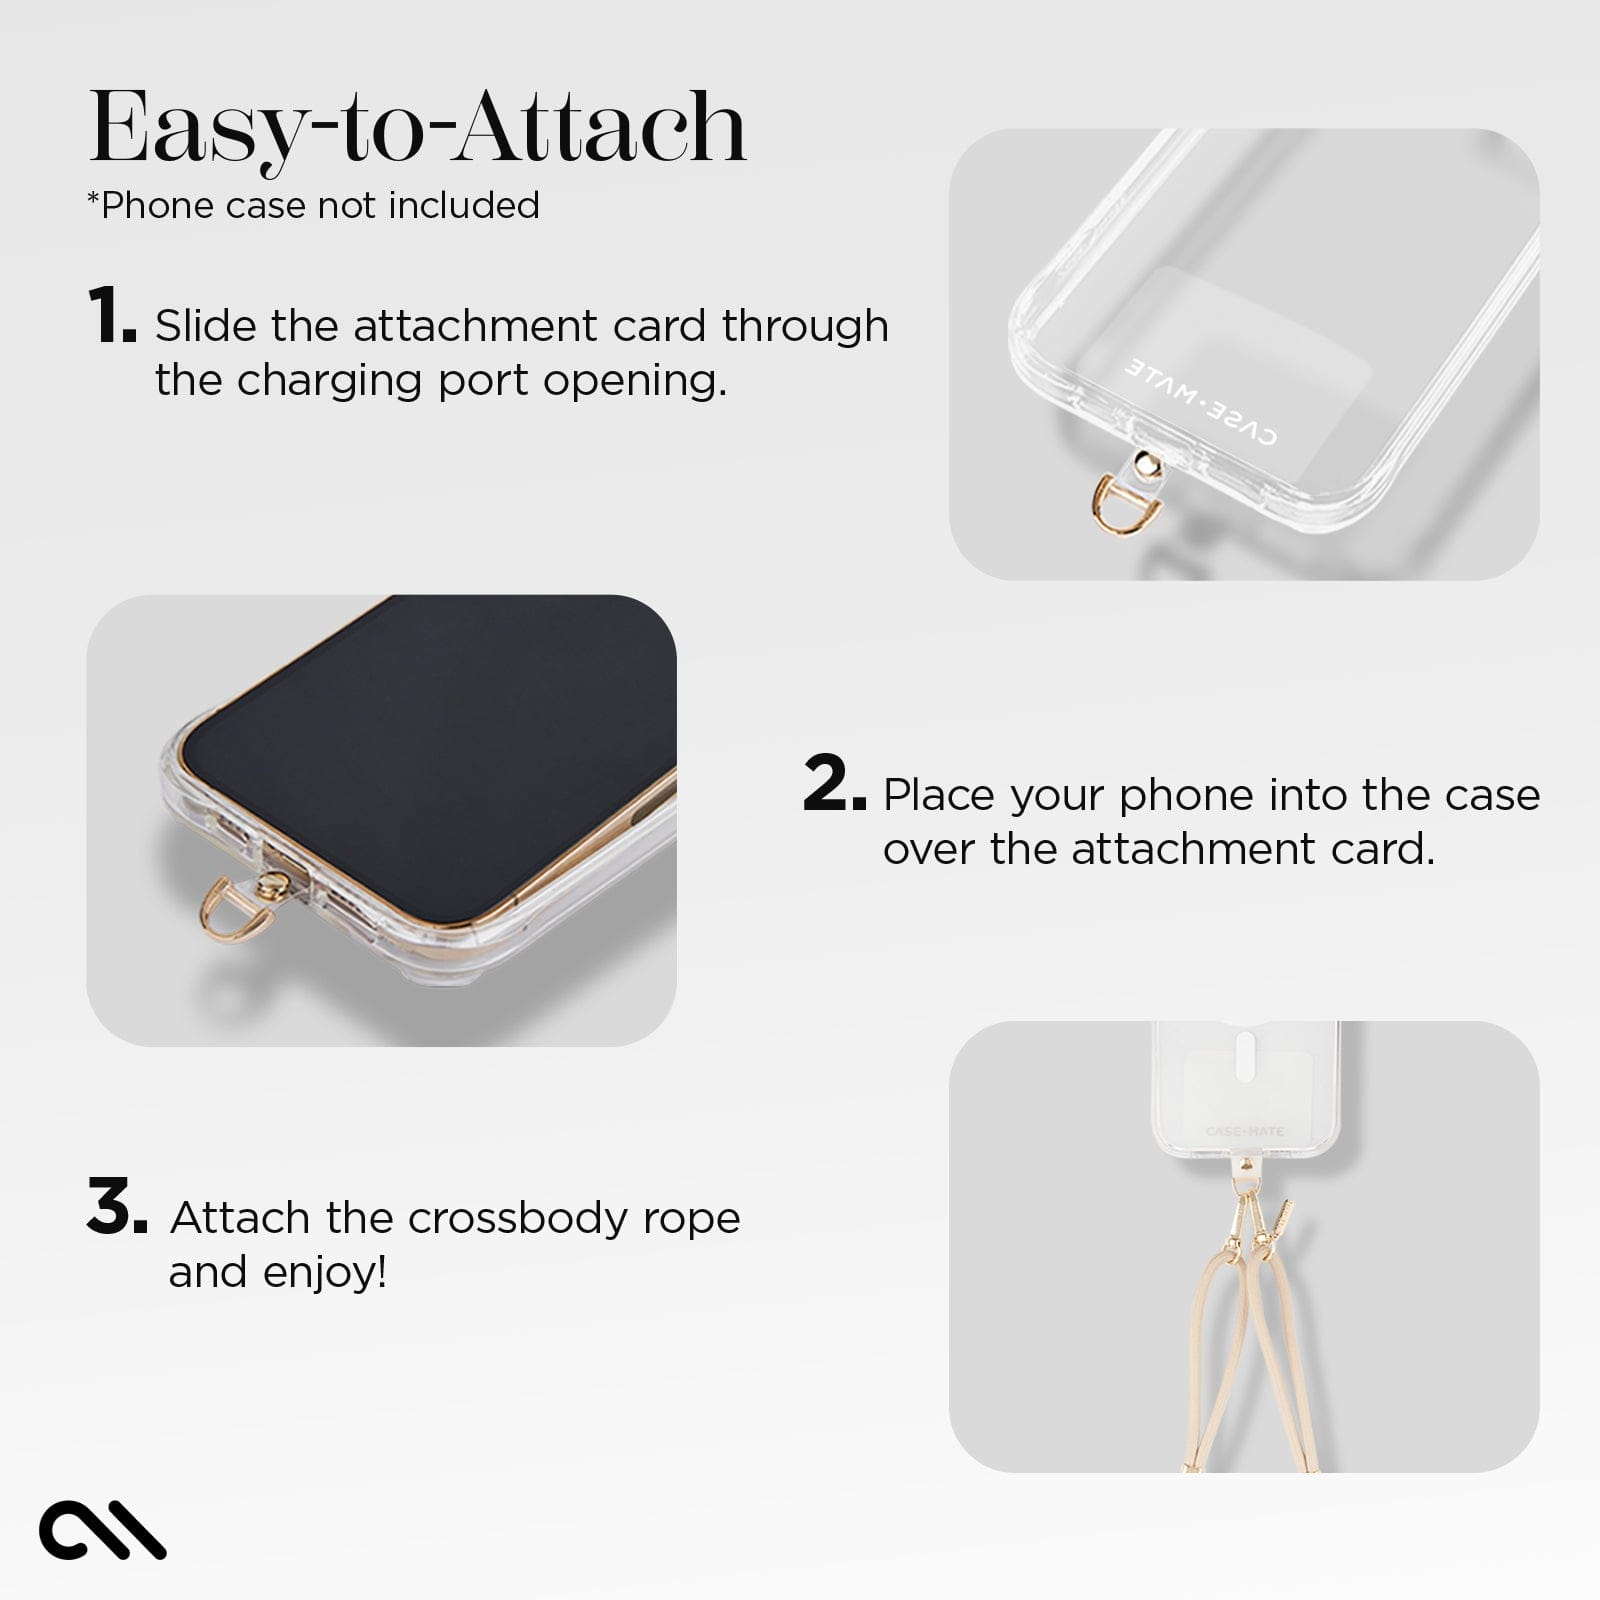 EASY-TO-ATTACH. PHONE CASE NOT INCLUDED. 1 SLIDE THE ATTACHMENT CARD THROUGH THE CHARGING PORT OPENING. 2. PLACE YOUR PHONE INTO THE CASE OVER THE ATTACHMENT CARD. 3. ATTACH THE CROSSBODY ROPE AND ENJOY!